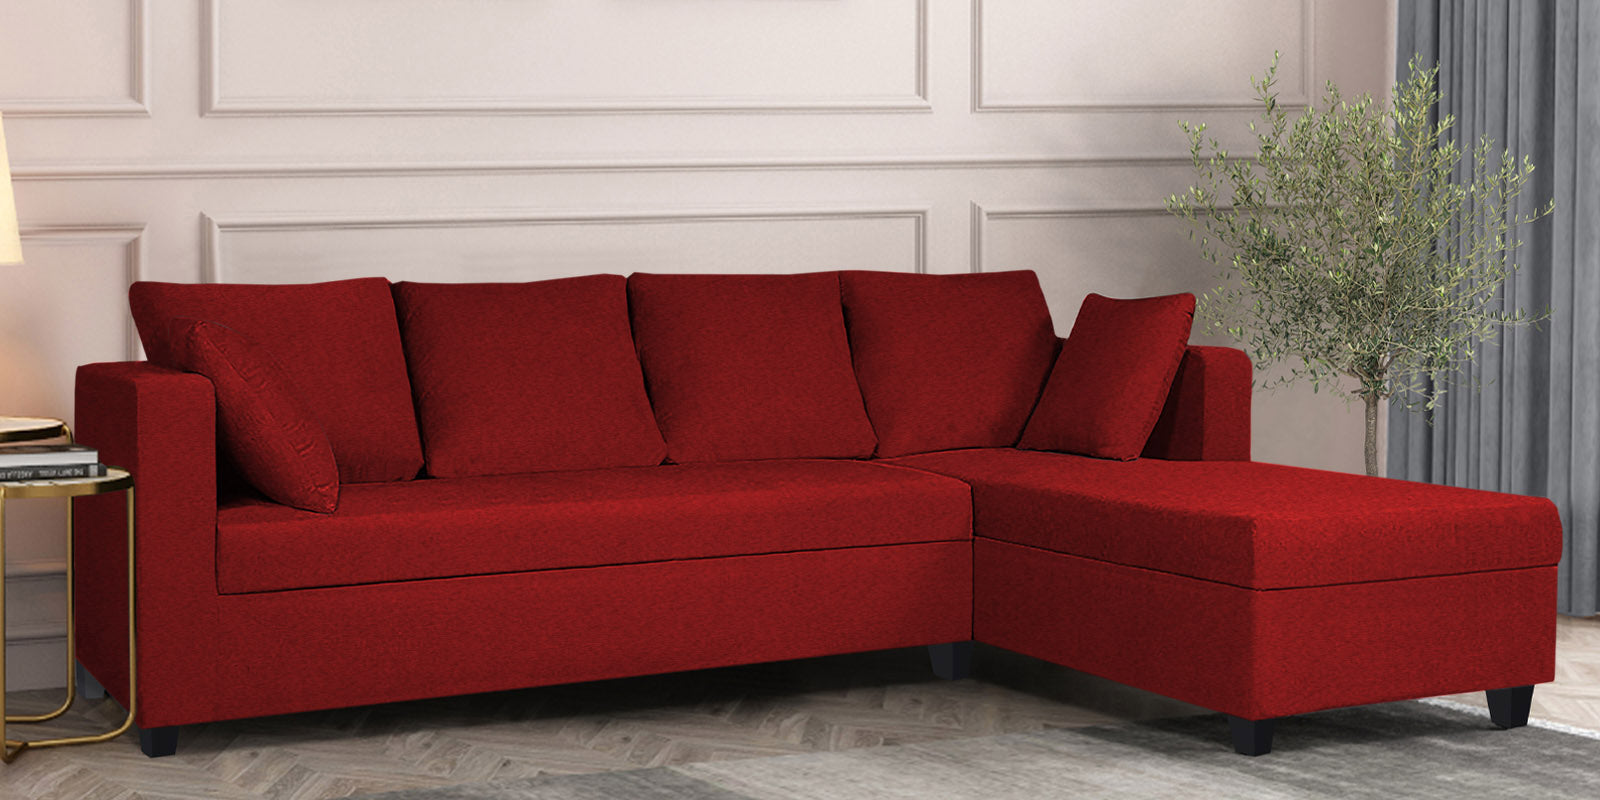 Nebula Fabric LHS Sectional Sofa (3+Lounger) in Blood Maroon Colour